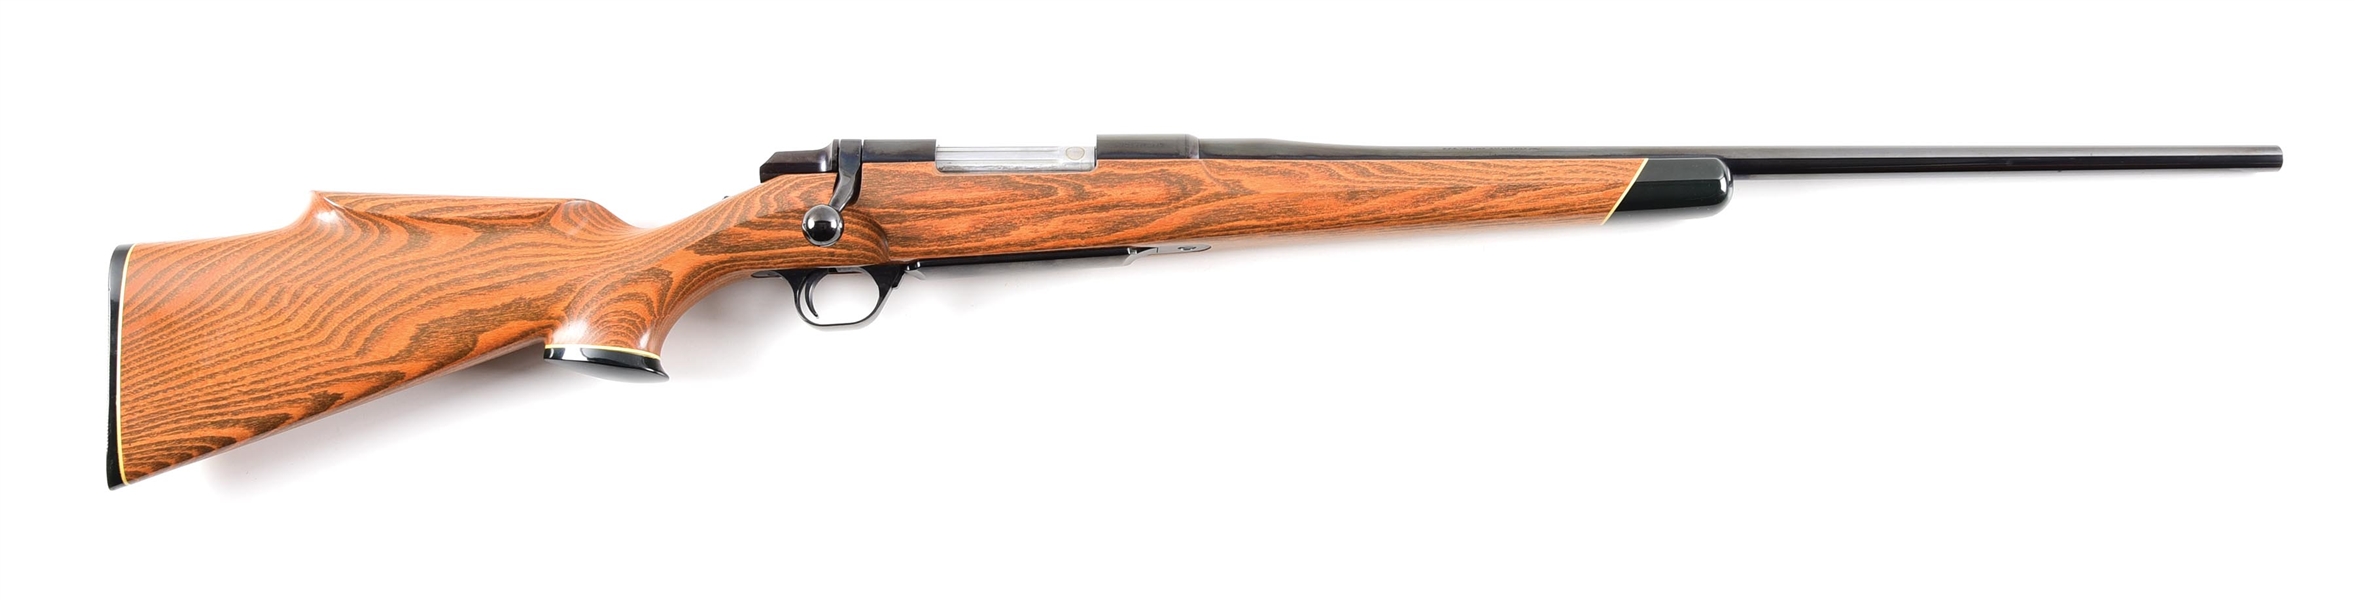 (M) BROWNING BBR BOLT ACTION RIFLE WITH HONEY LOCUST/ GLEDITSIA TRICANTHOS STOCK.